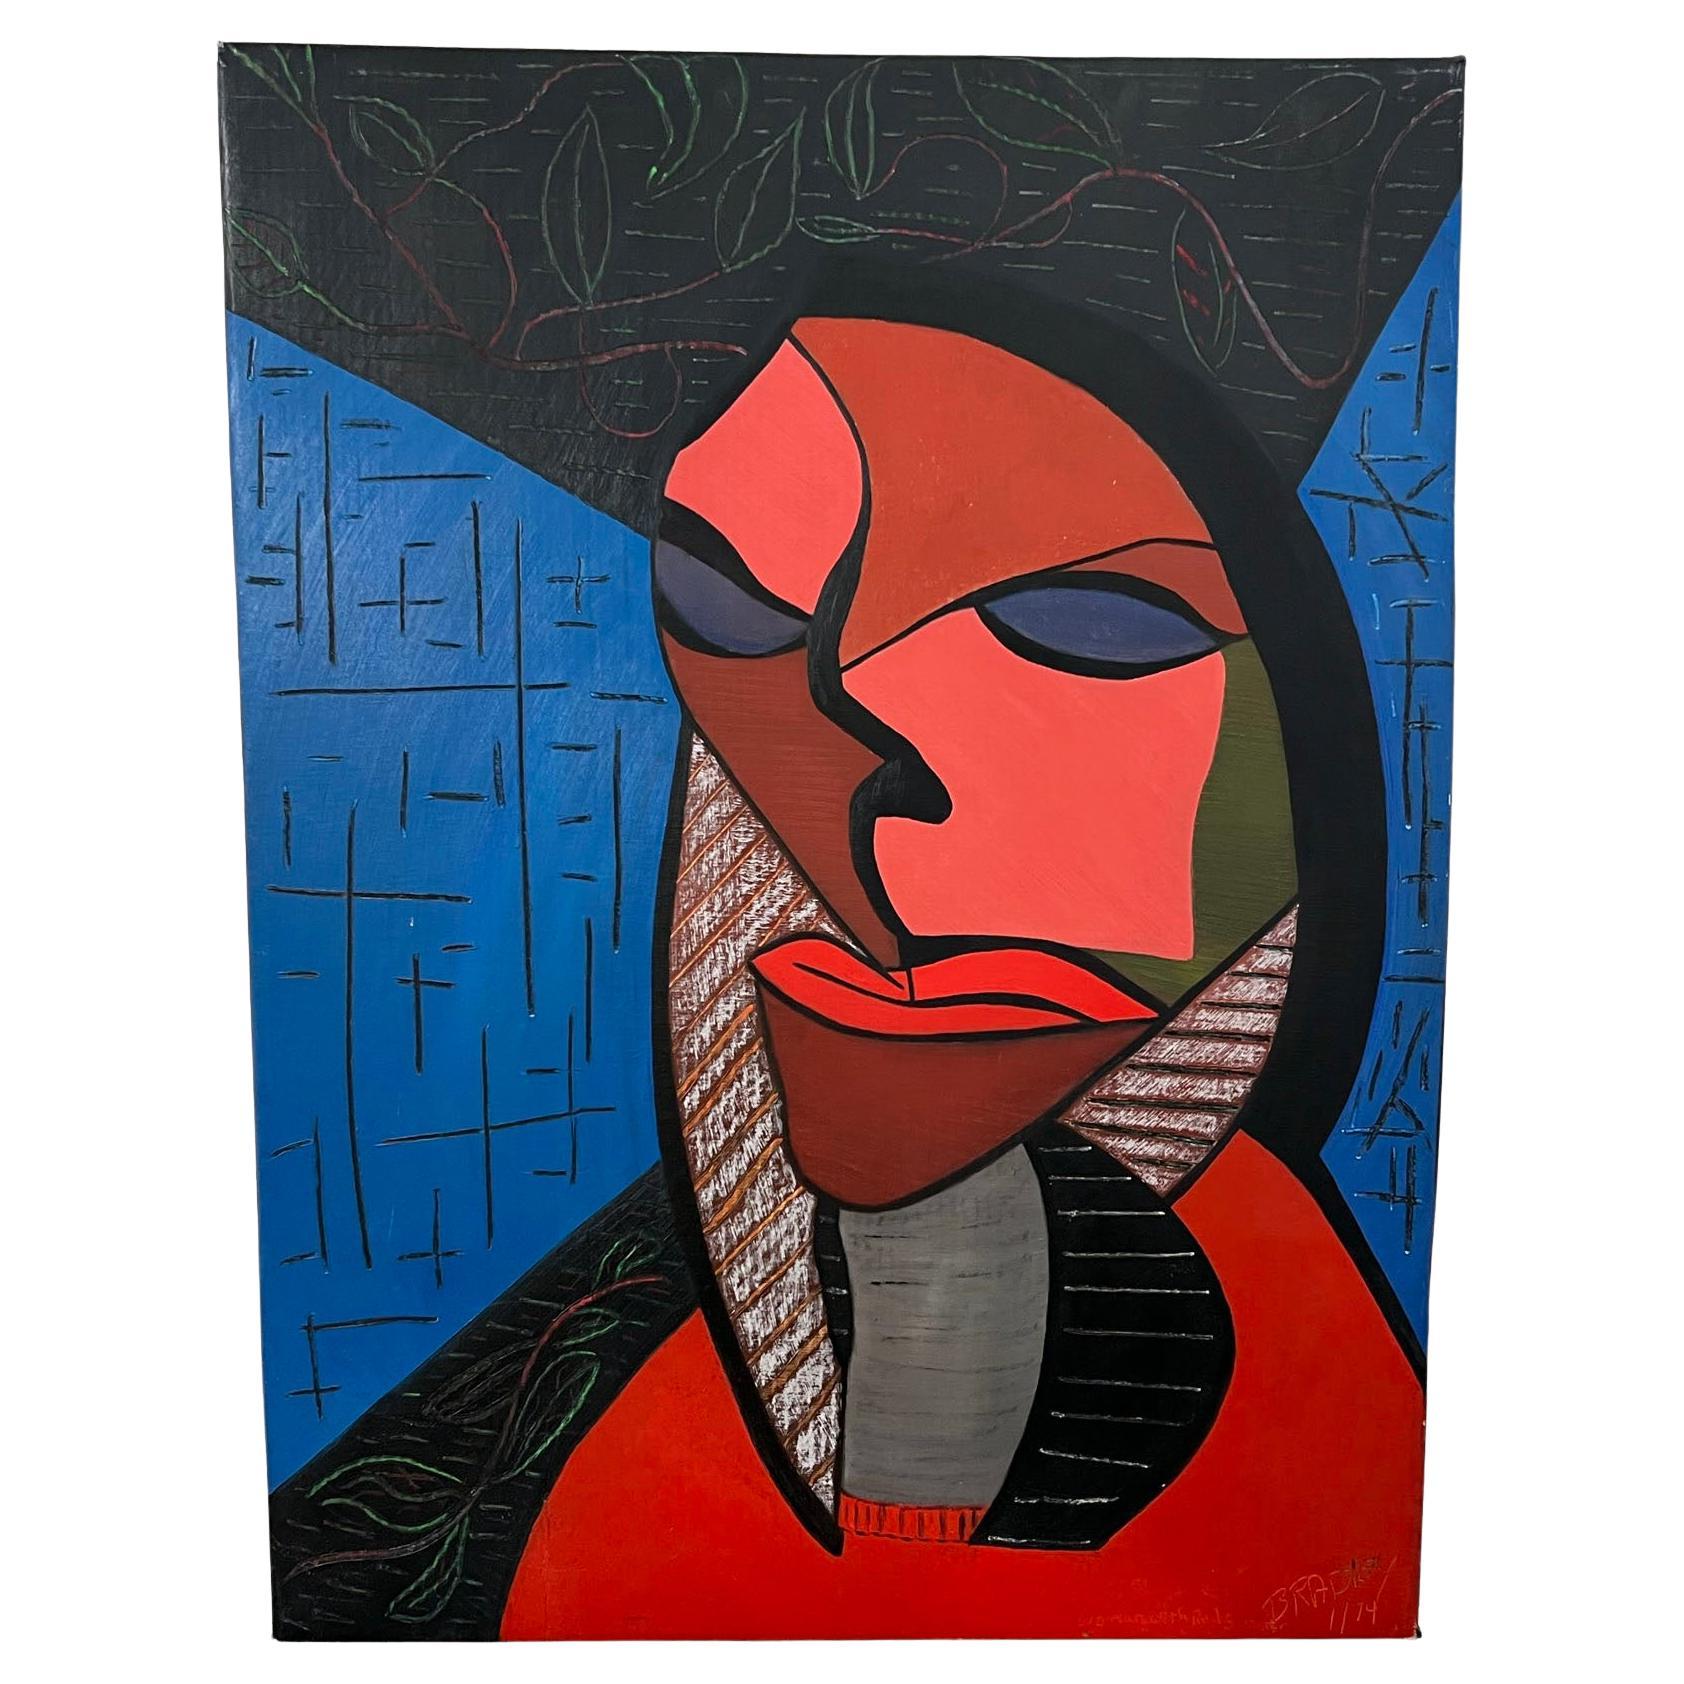 Cubist Painting Titled "Woman with Red Sweater" Signed Lawrence Bradley, D. 1974